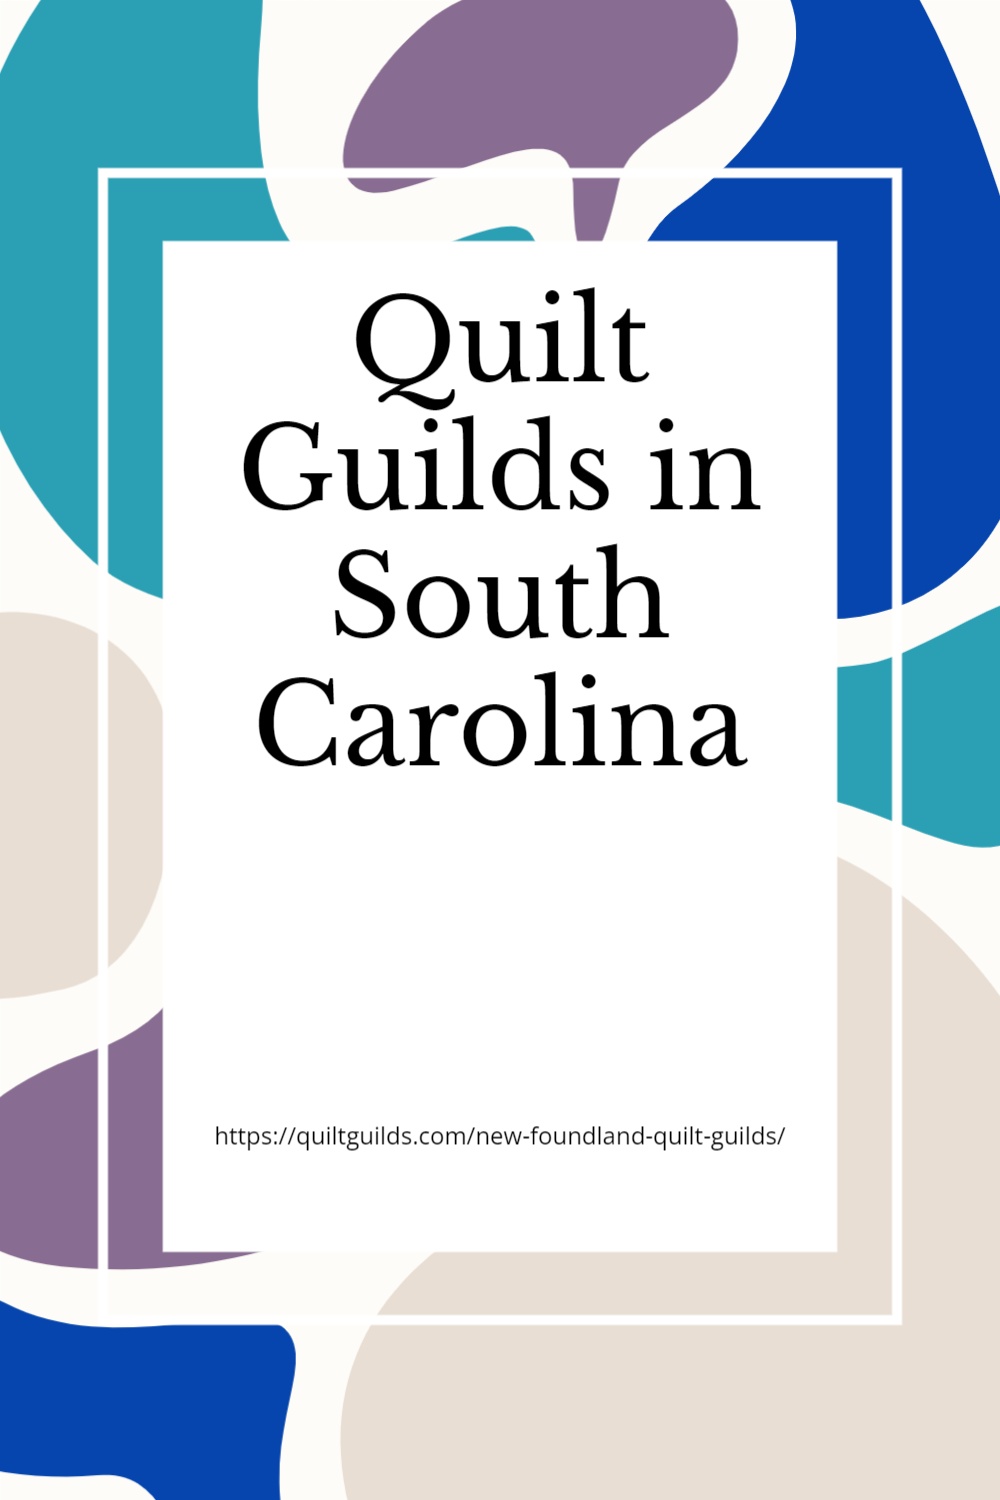 Quilting Guilds in South Carolina for quilters